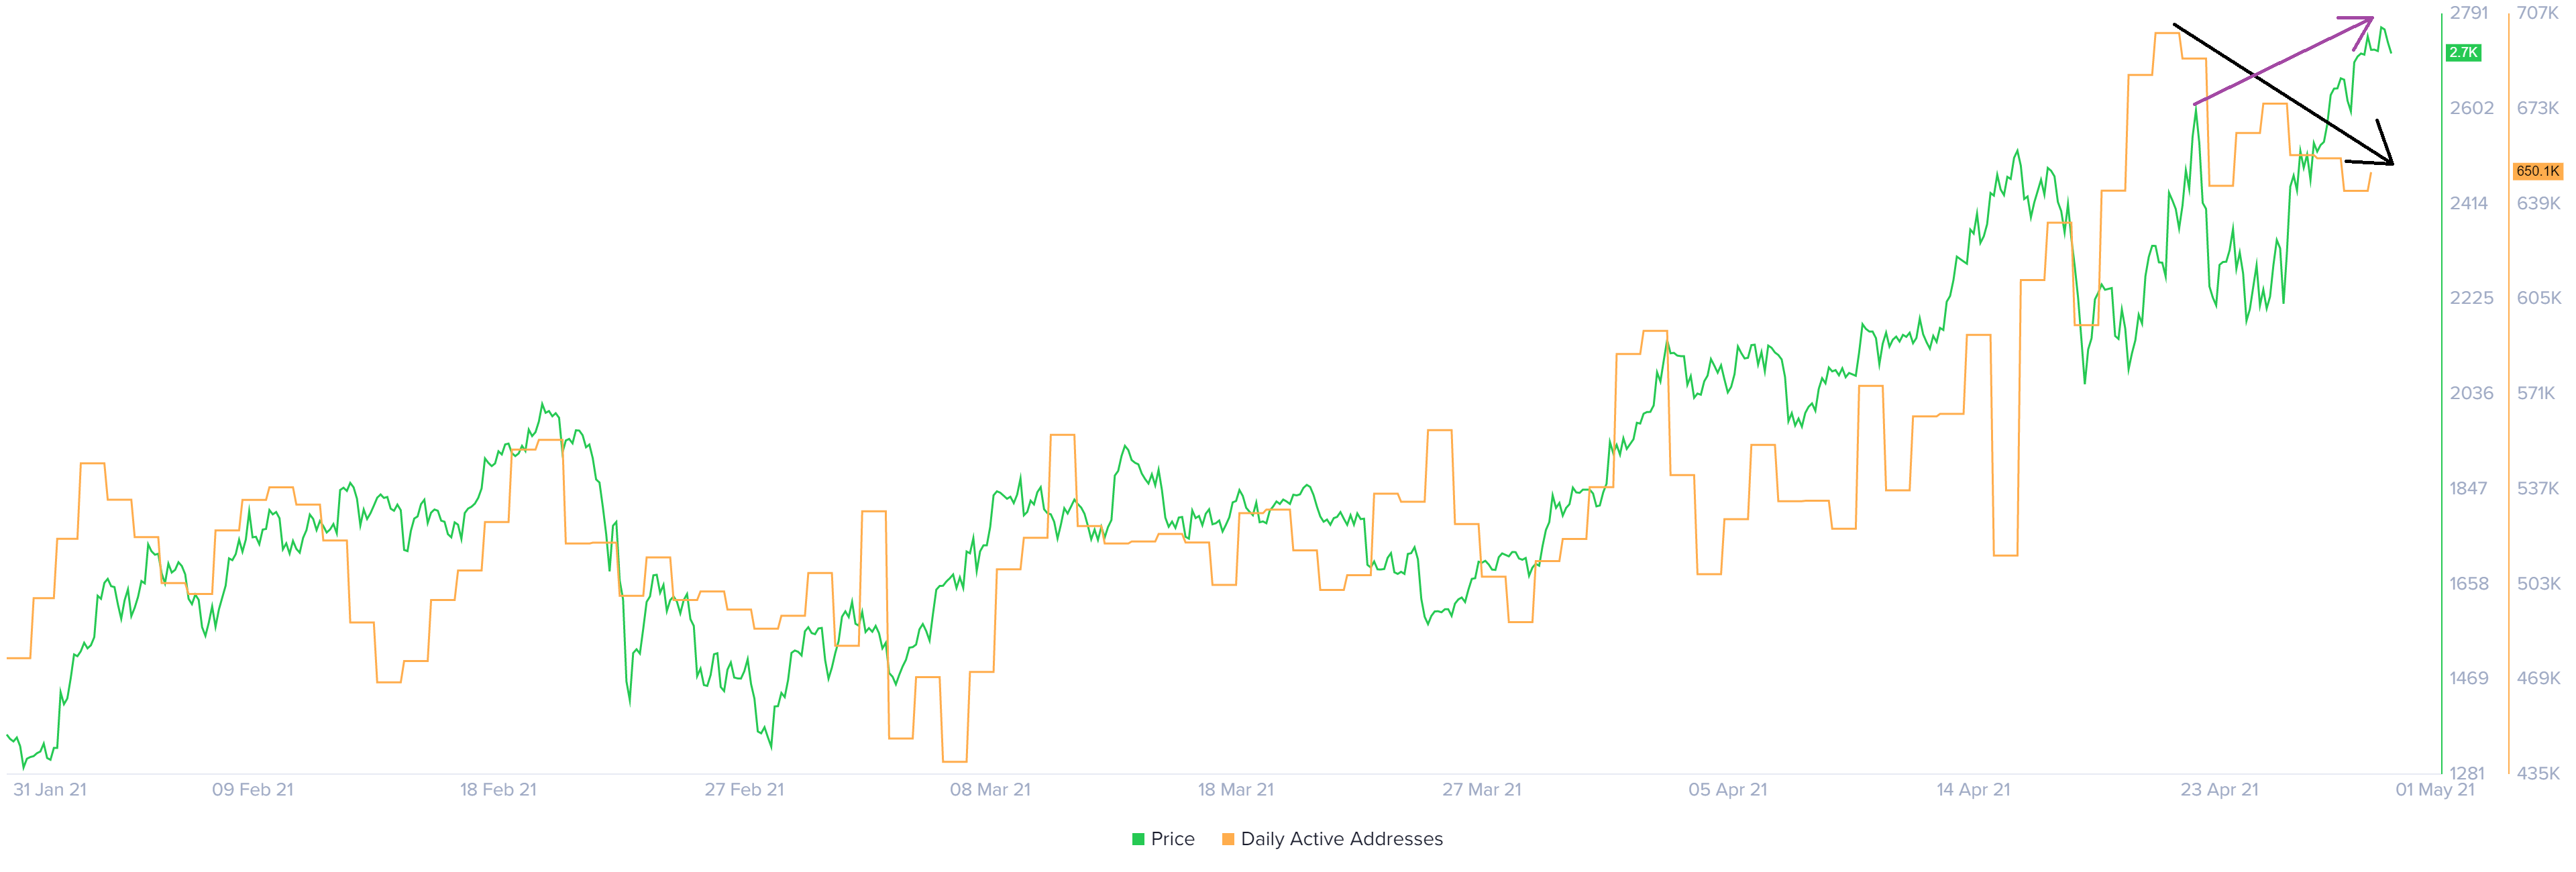 ETH price and daily active addresses chart